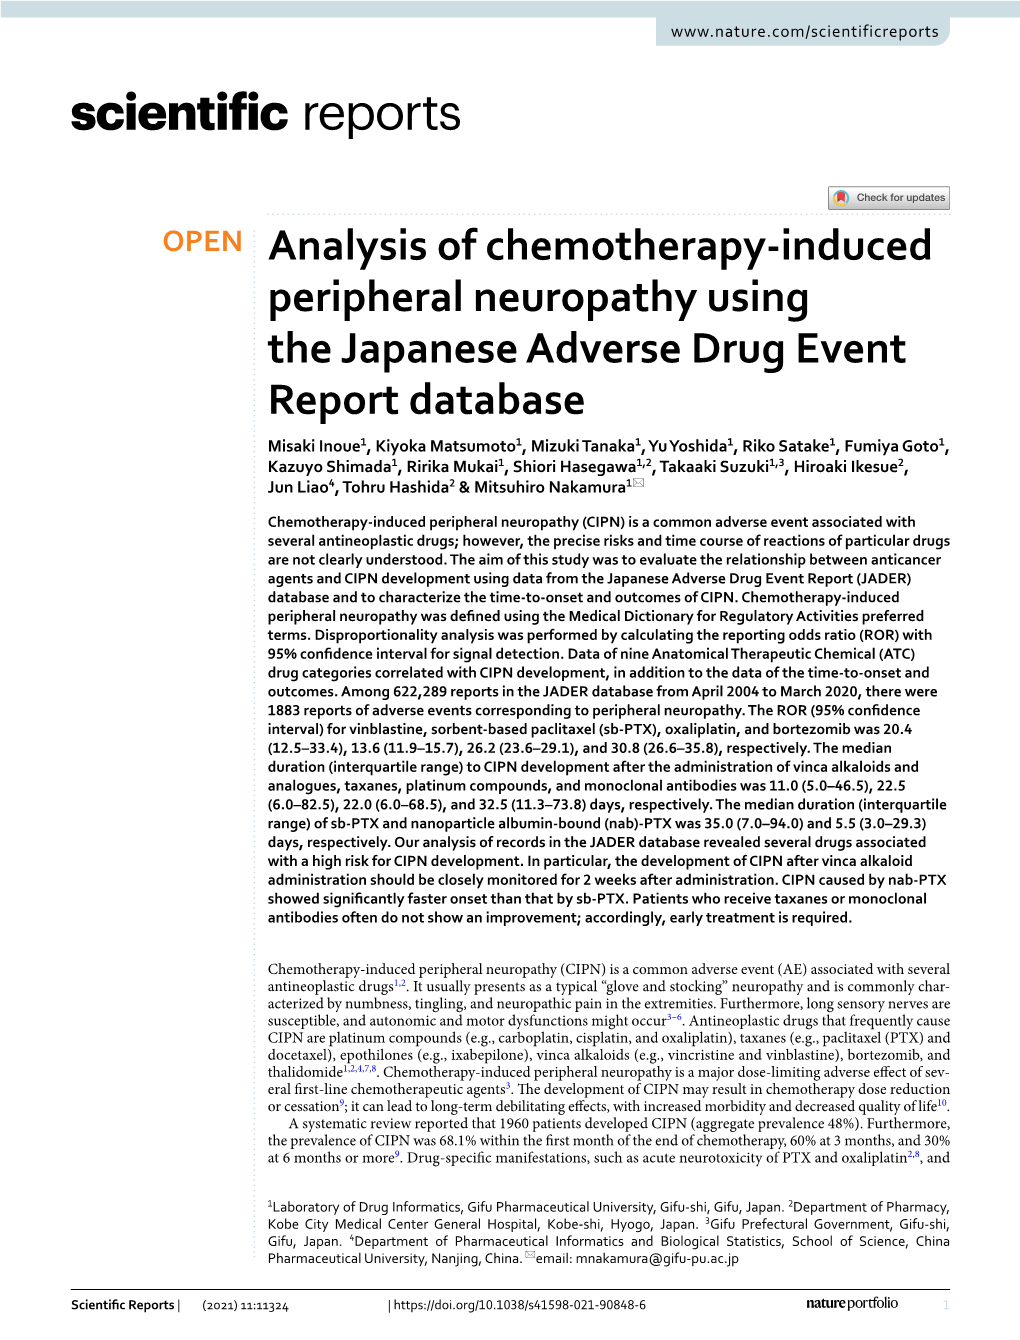 Analysis of Chemotherapy-Induced Peripheral Neuropathy Using The